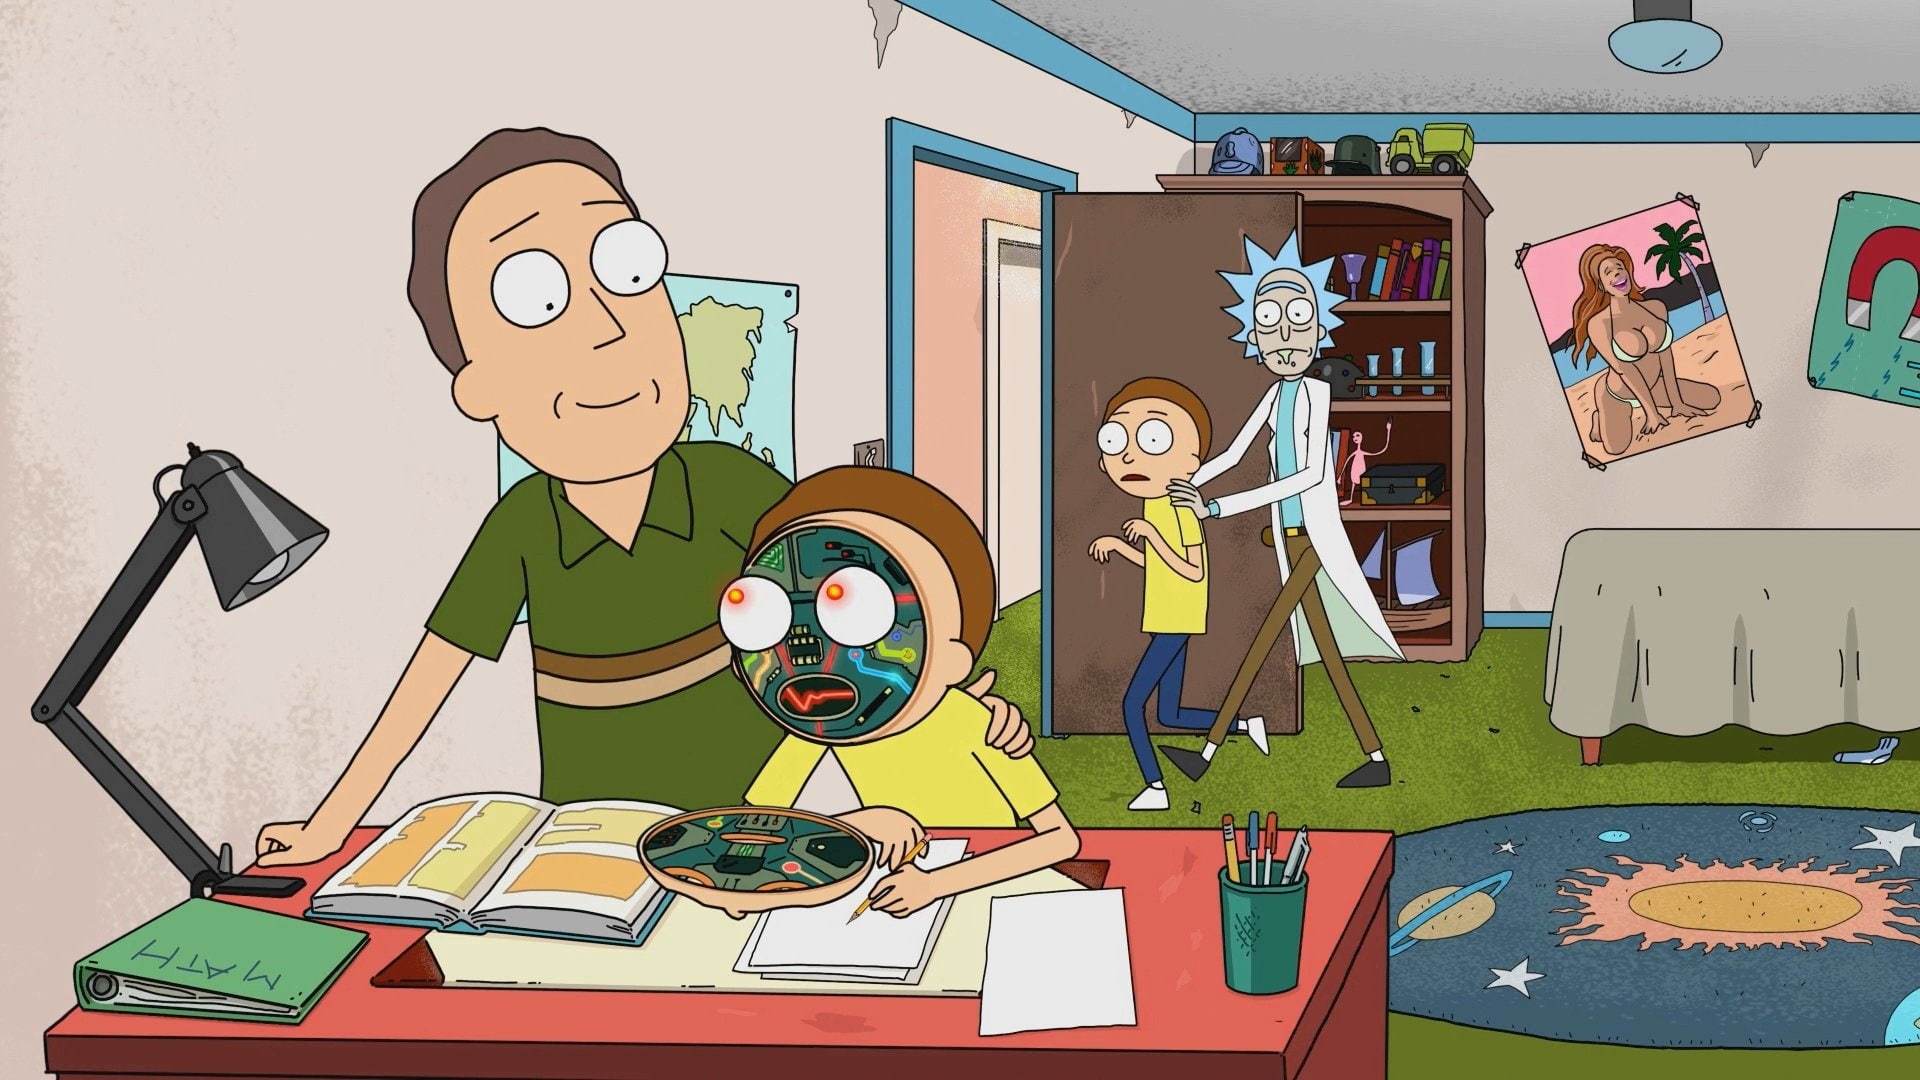 TV Show, Rick and Morty, Jerry Smith, Morty Smith, Rick Sanchez